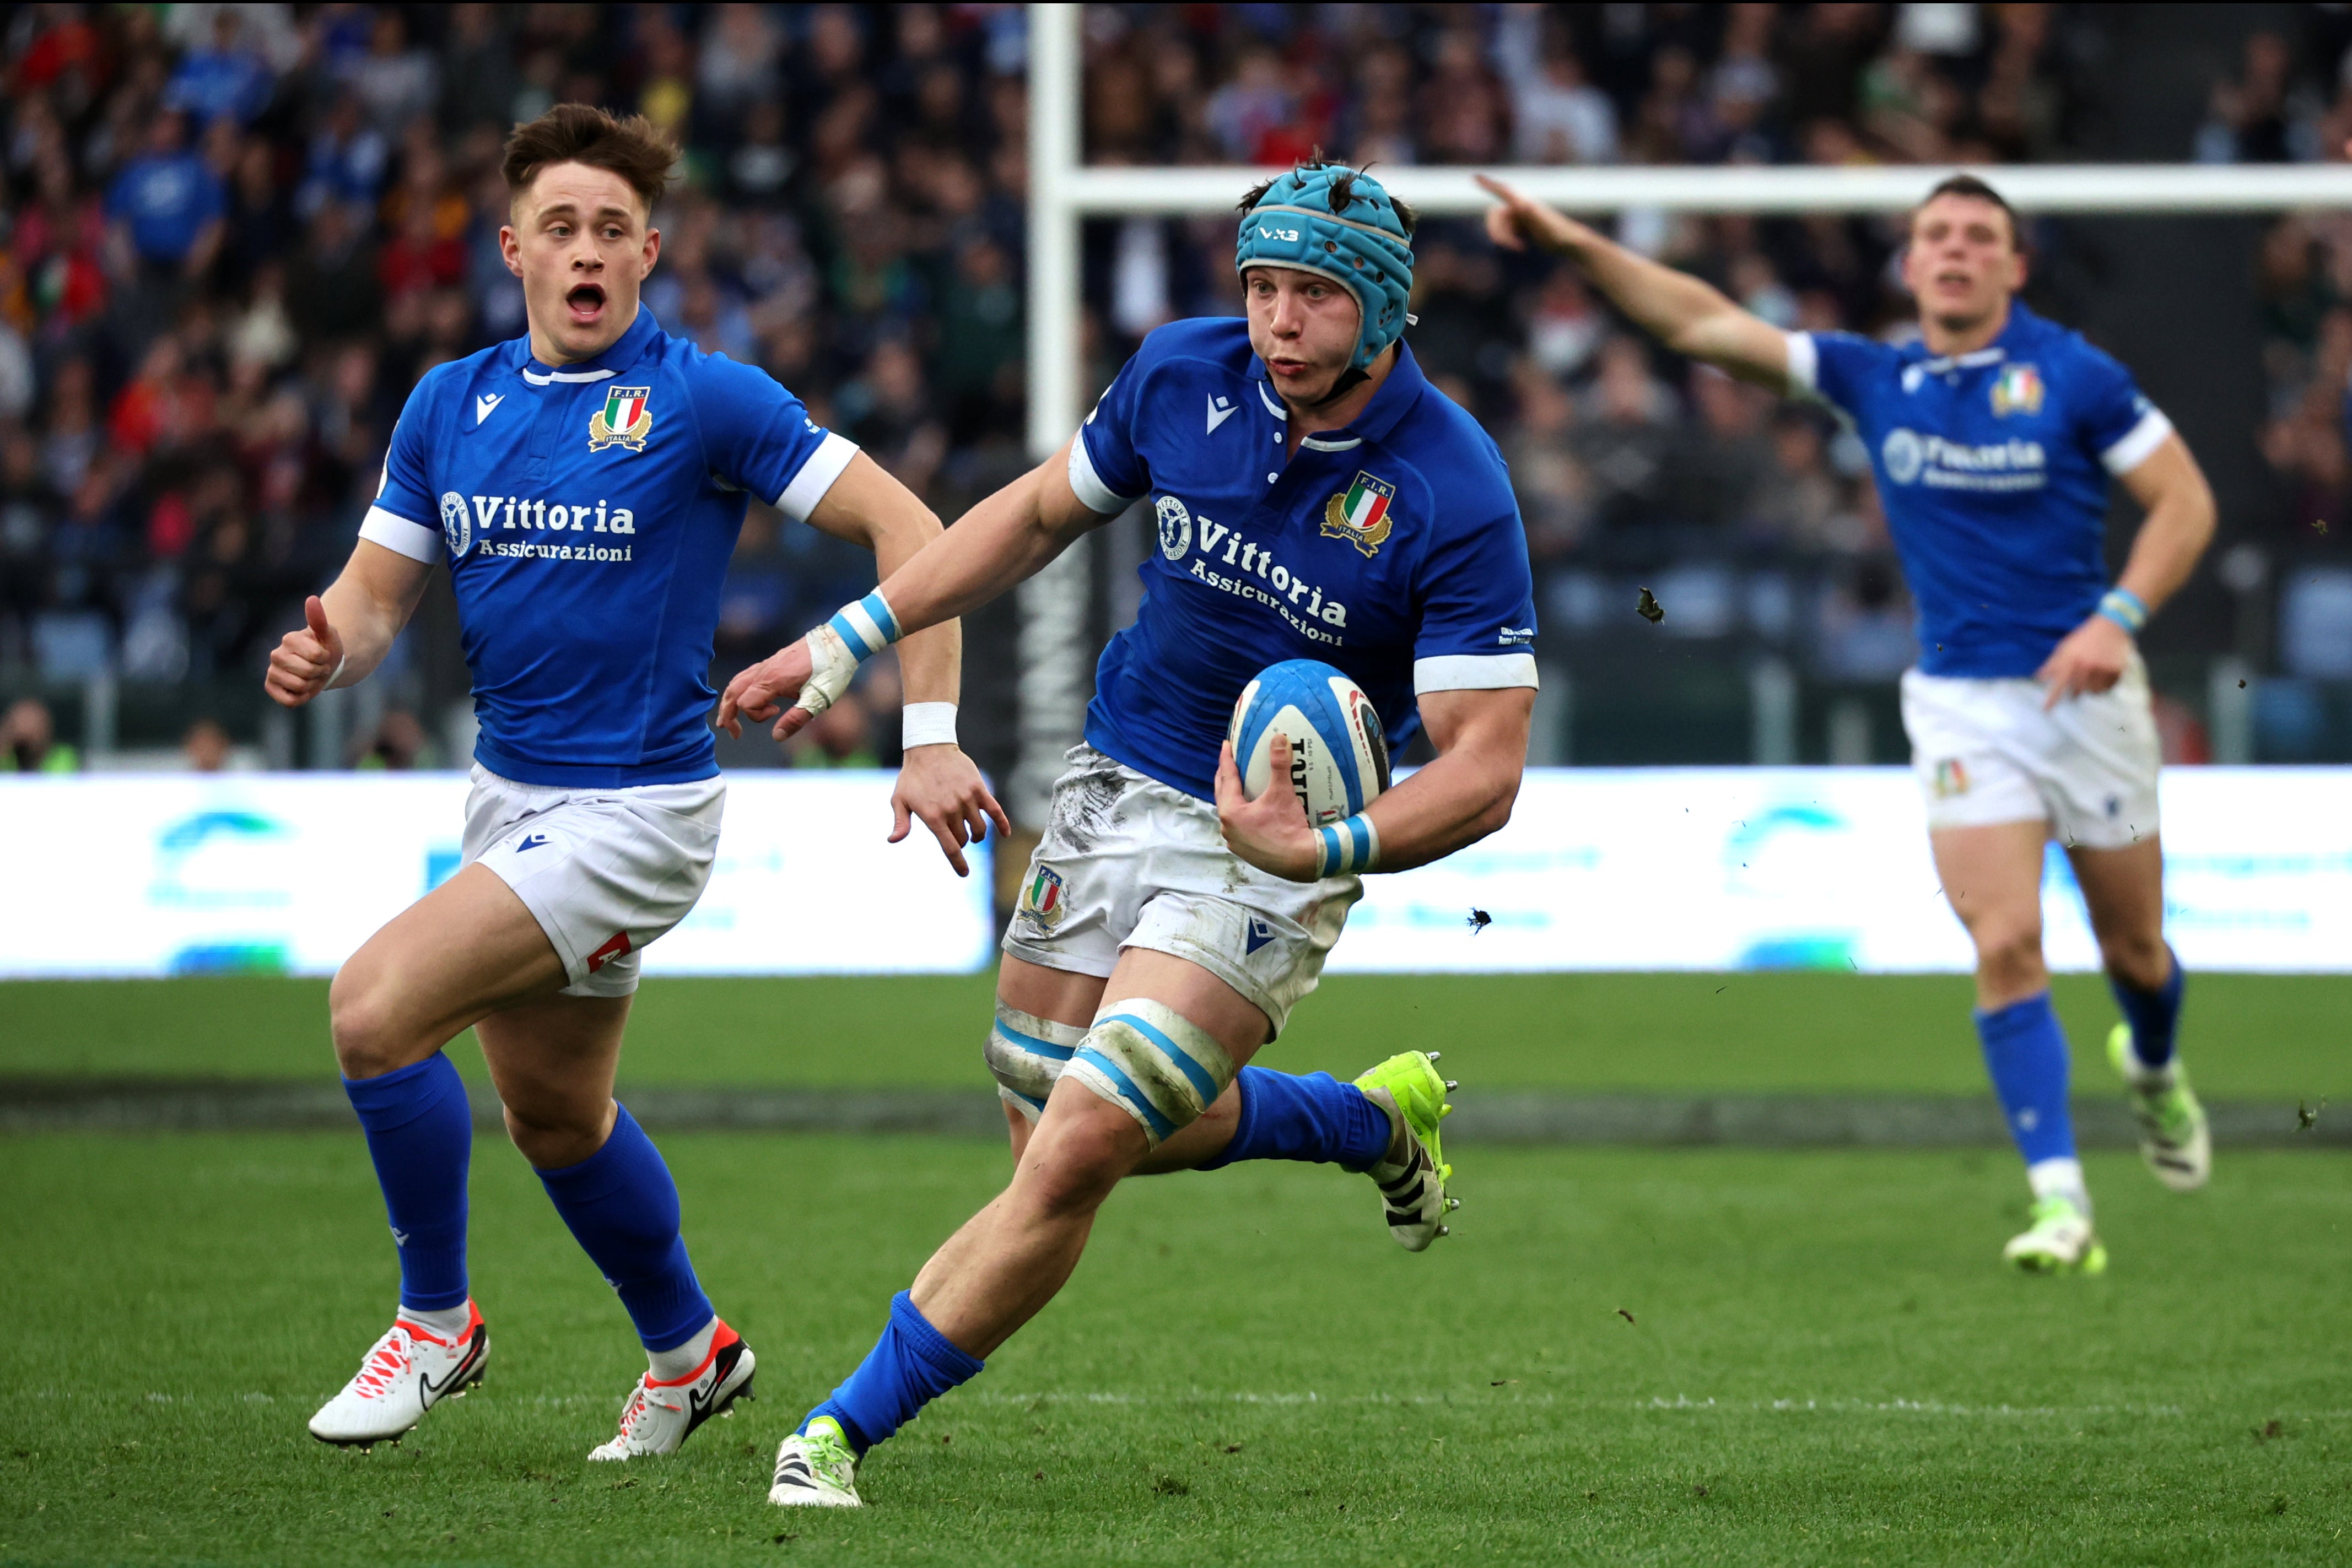 Italy played attacking, exciting rugby in Rome